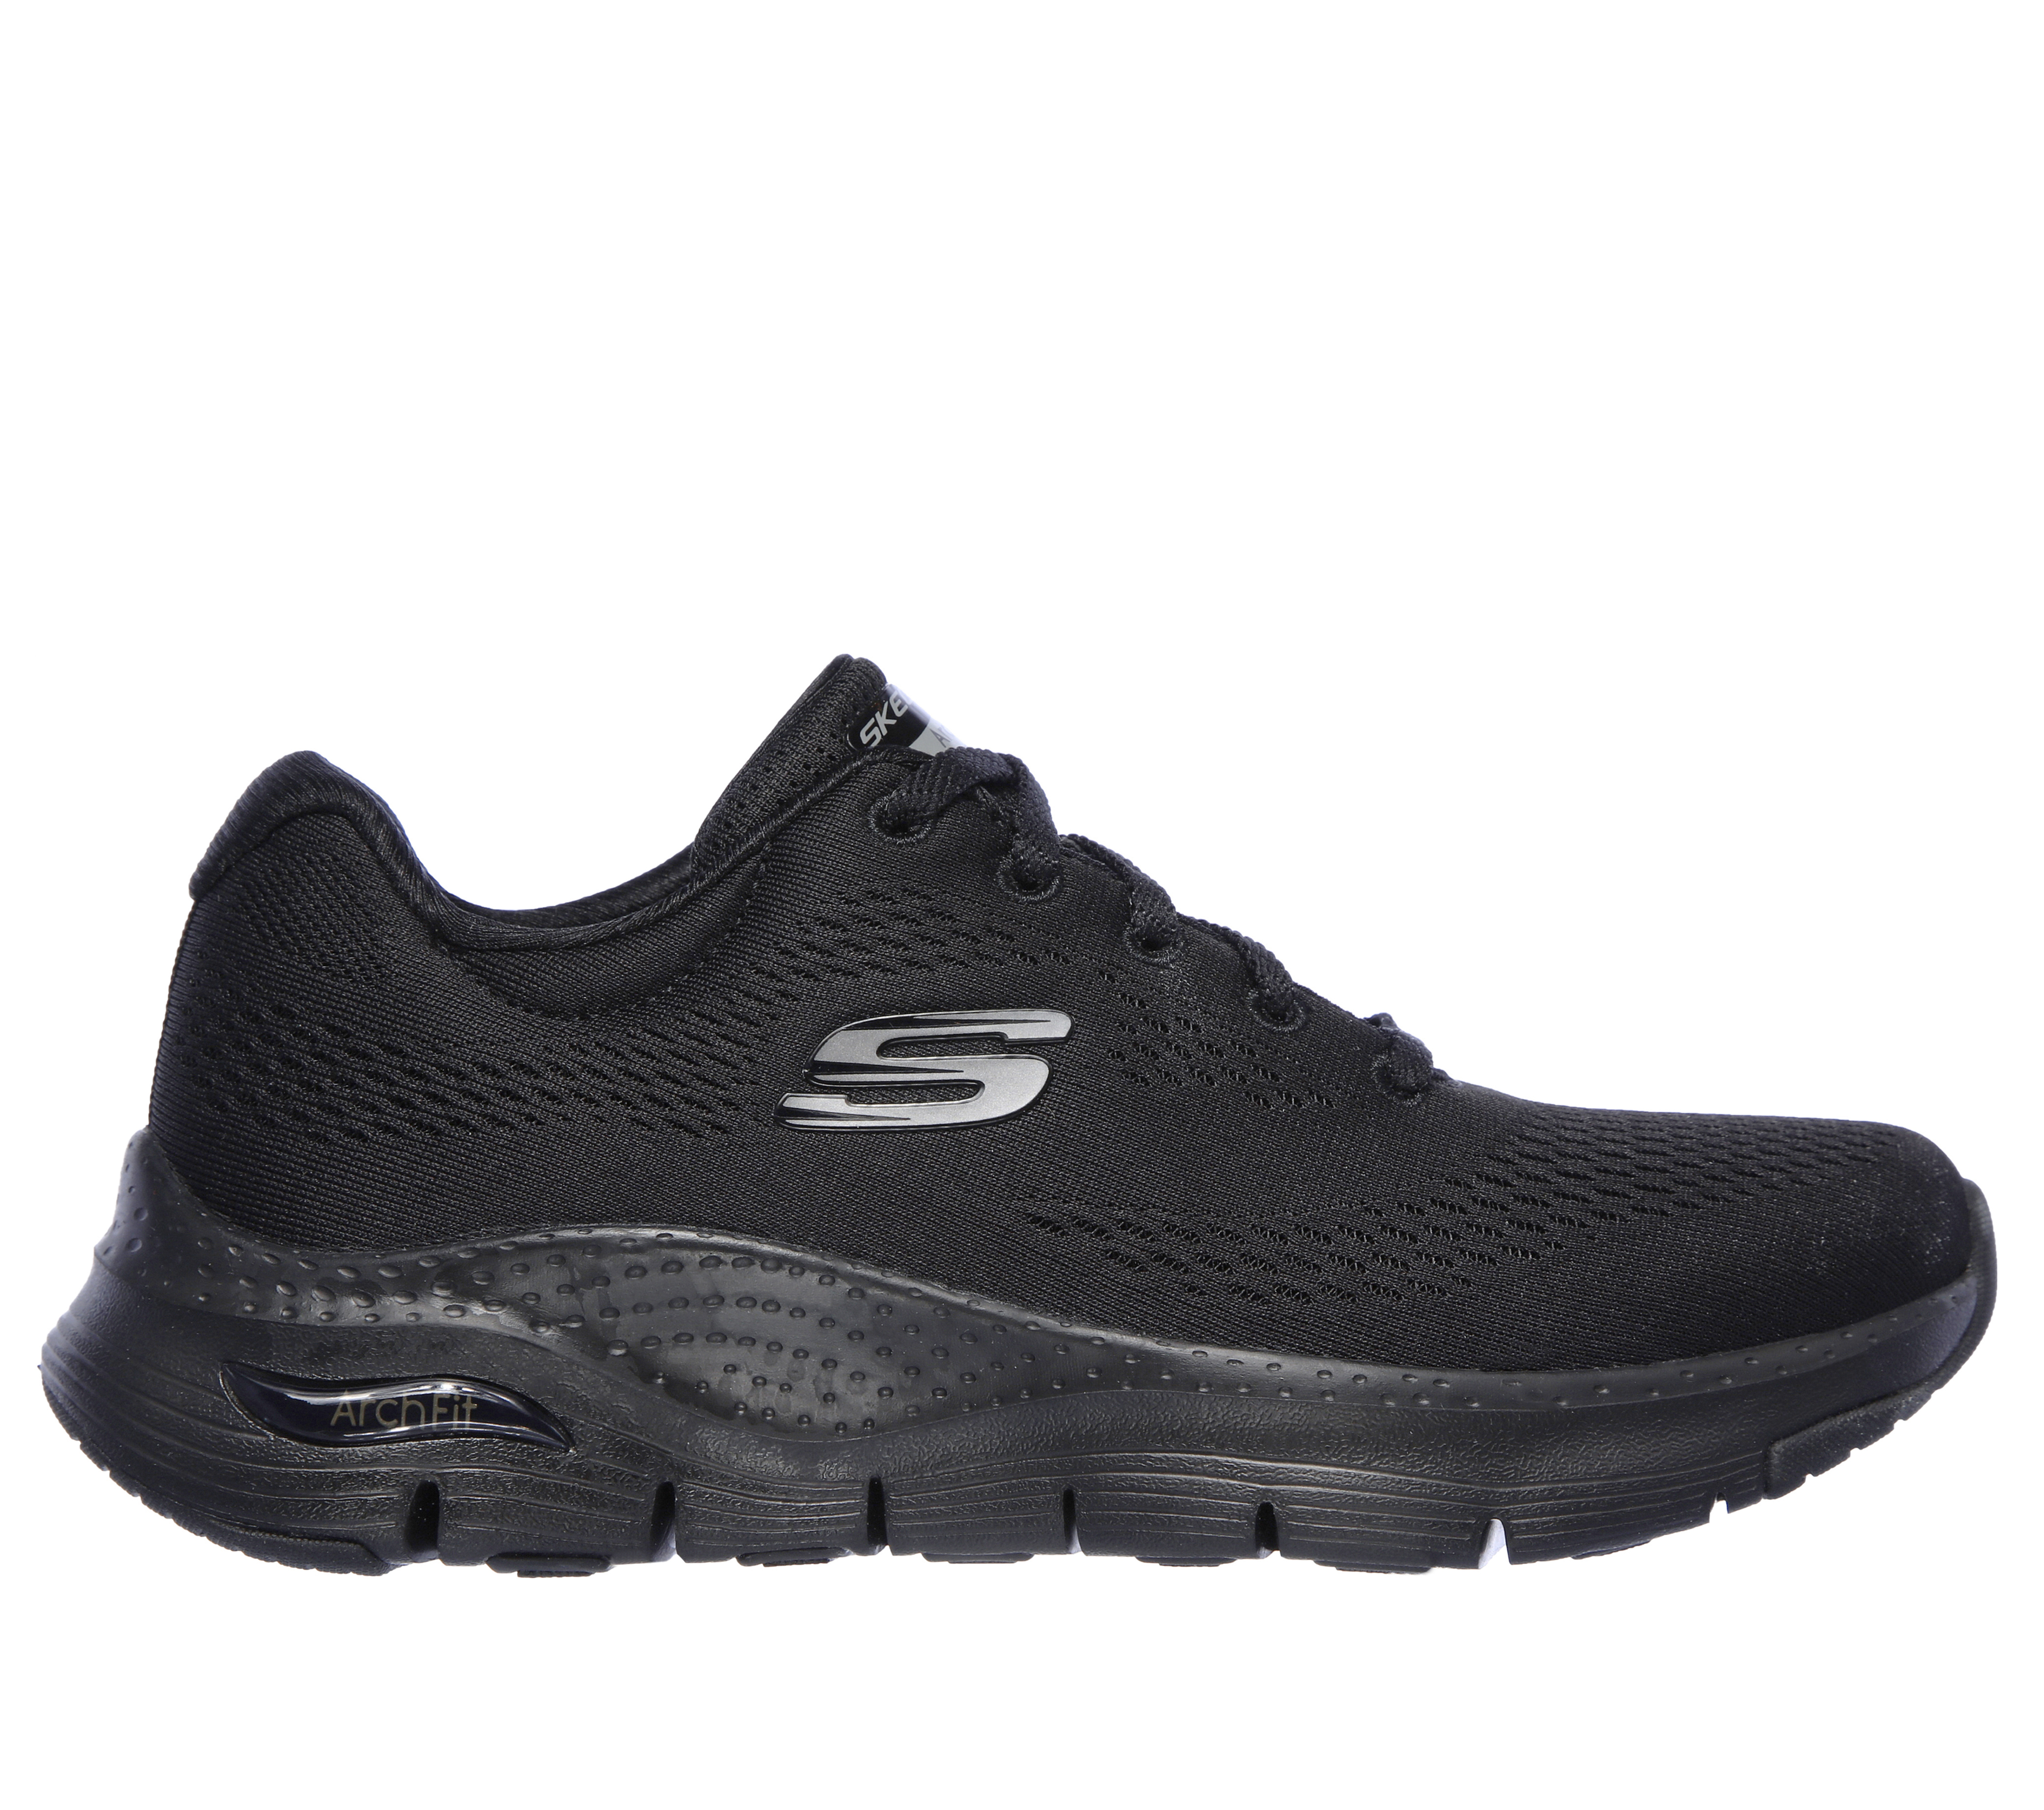 Shop the Skechers Arch Fit - Big Appeal